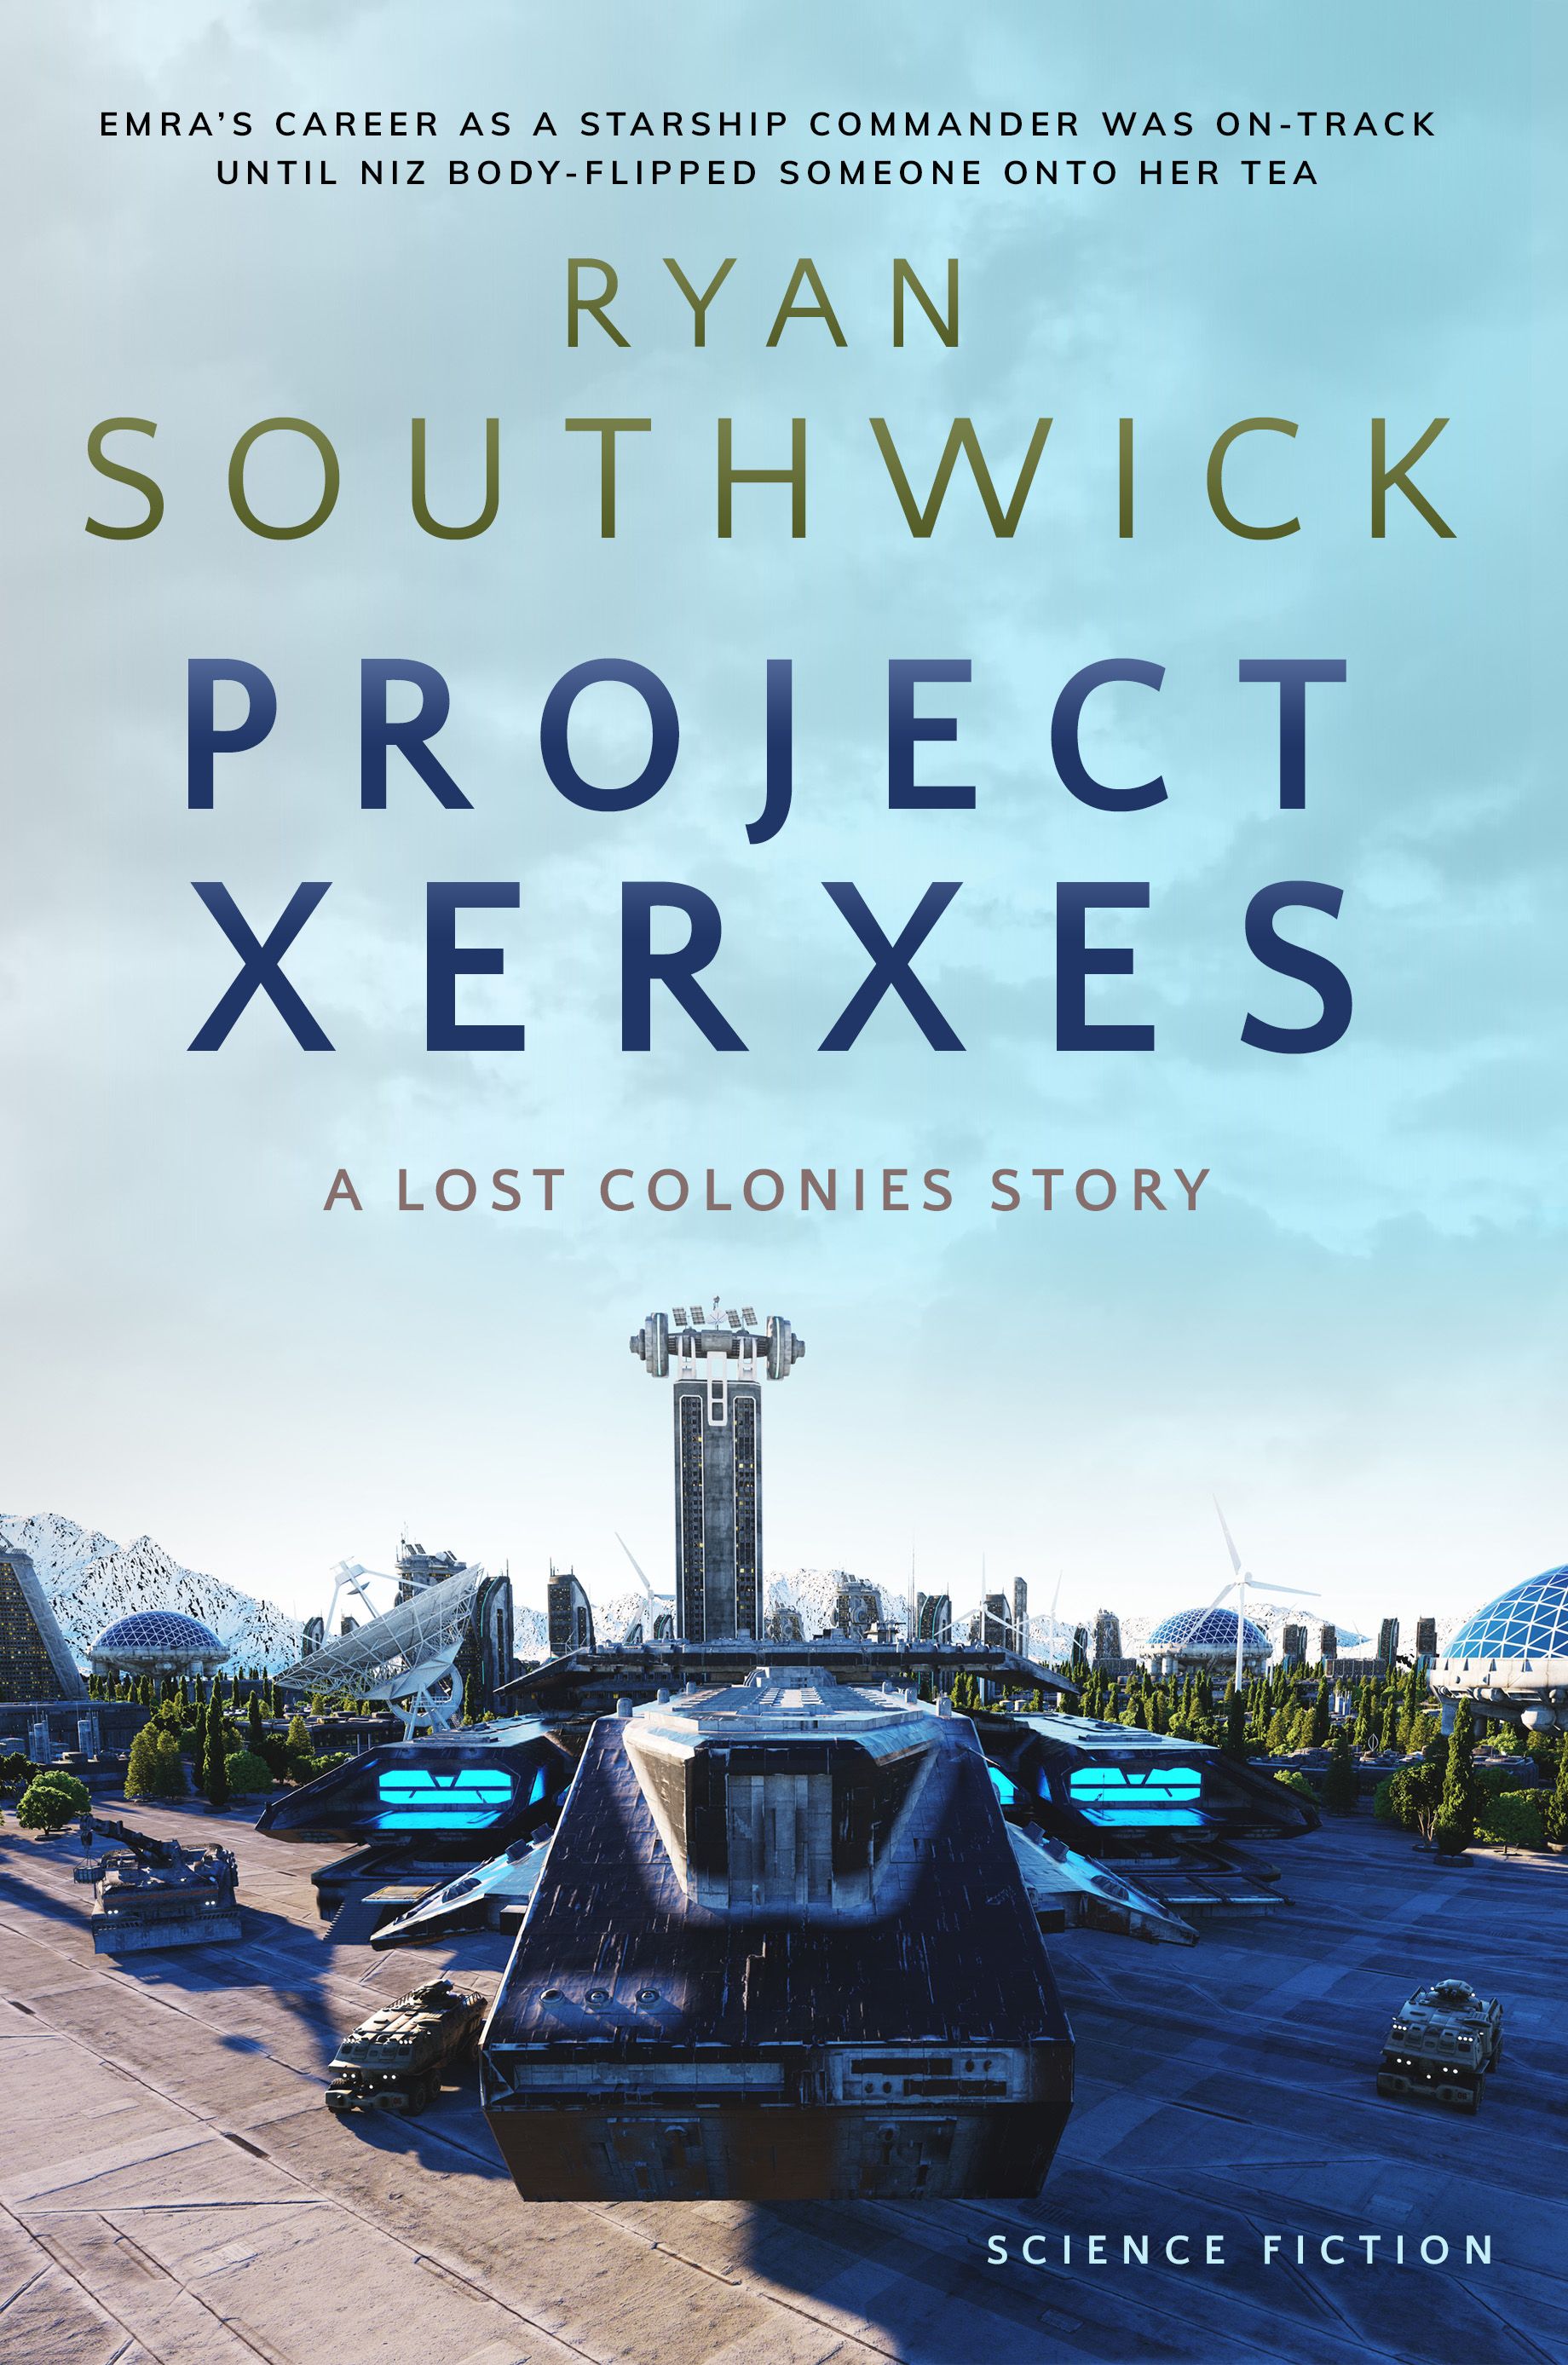 Book cover: Project Xerxes by Ryan Southwick. A Lost Colonies Story.